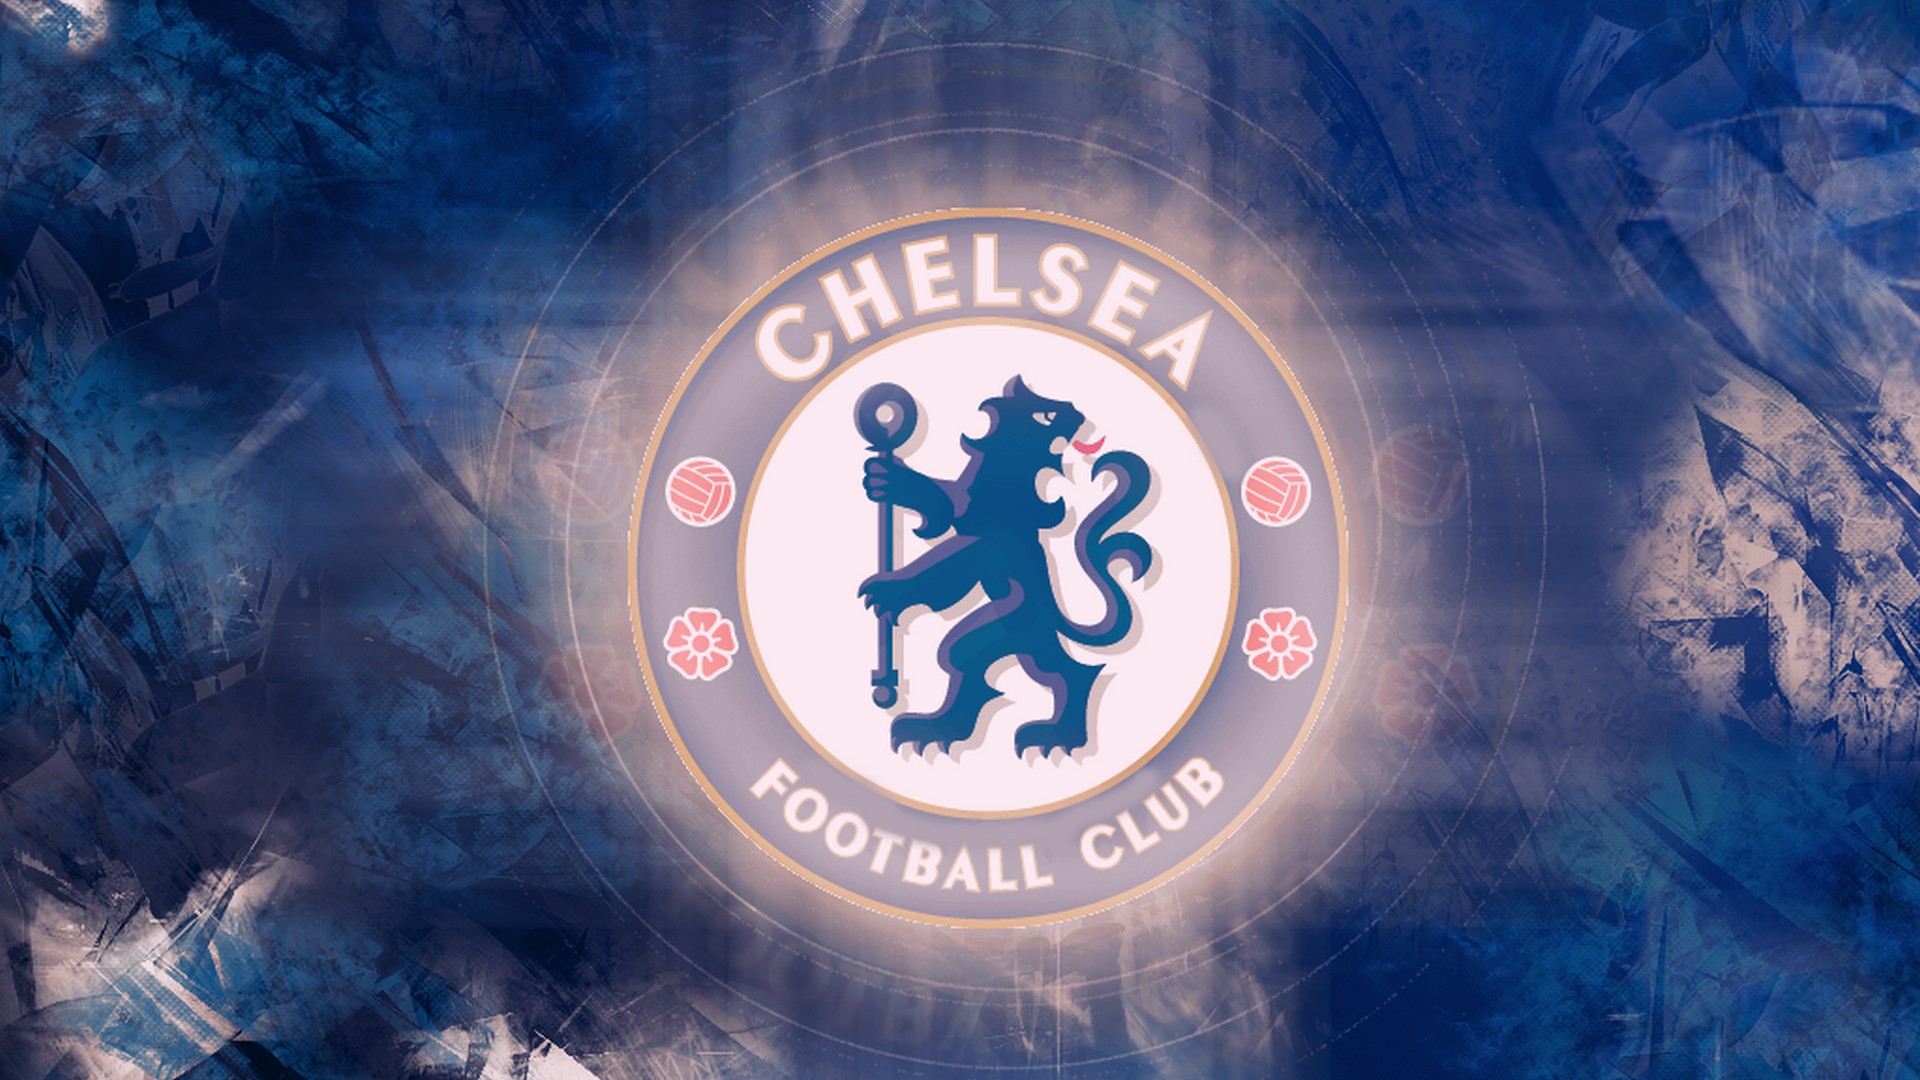 Chelsea Soccer HD Wallpapers With Resolution 1920X1080 pixel. You can make this wallpaper for your Mac or Windows Desktop Background, iPhone, Android or Tablet and another Smartphone device for free